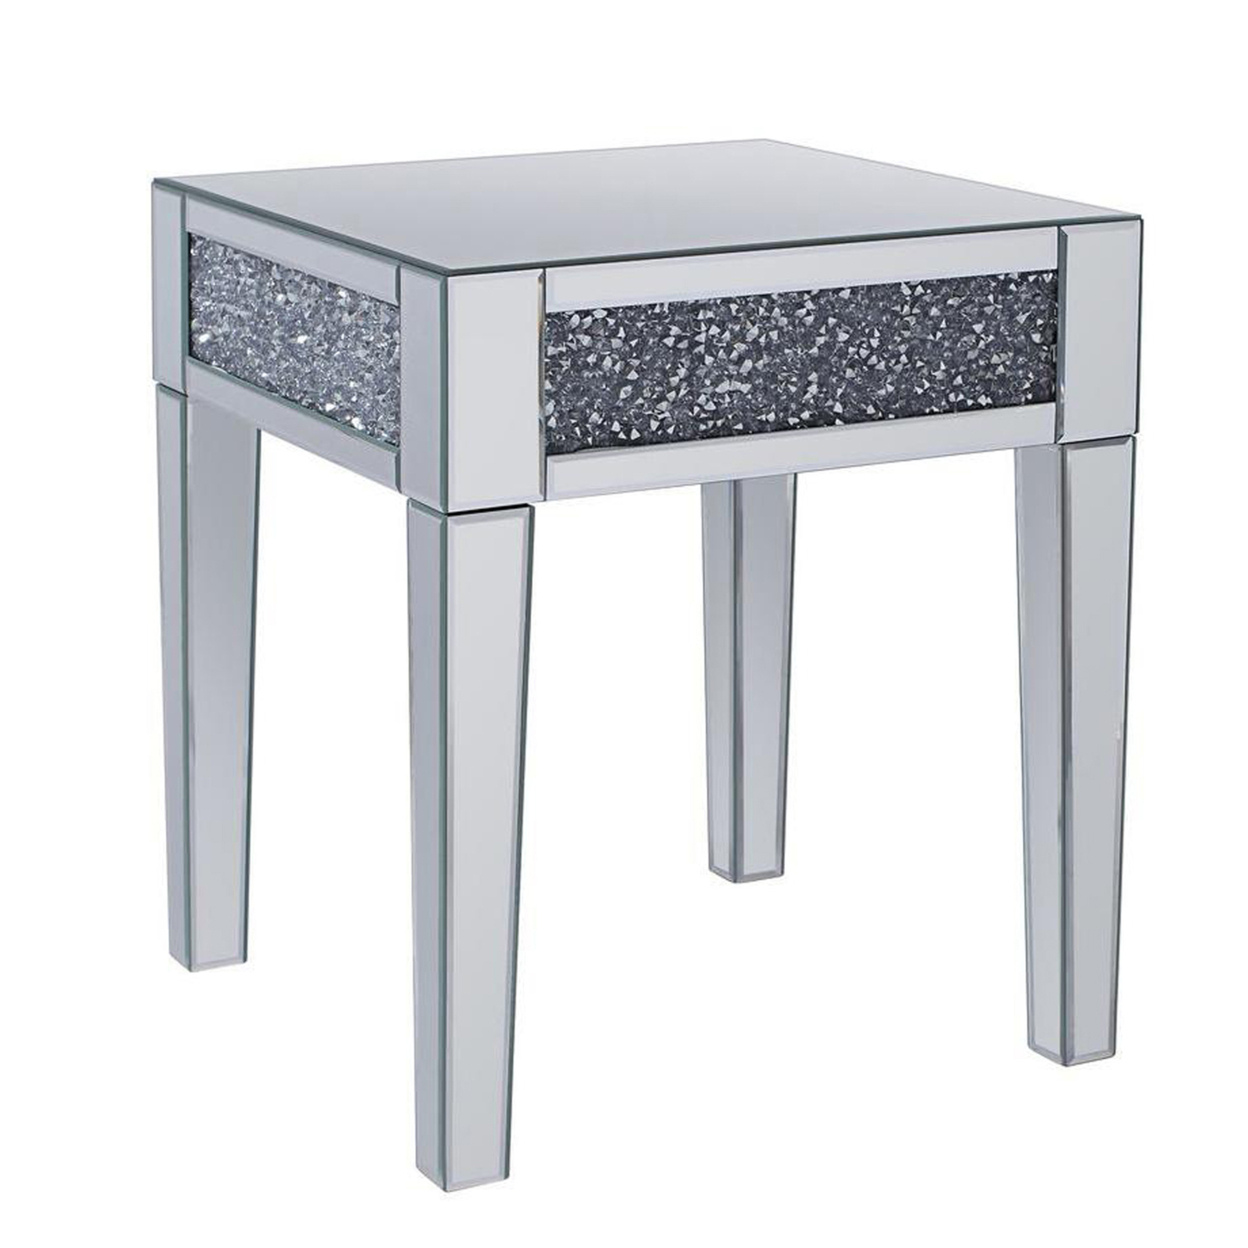 Wood And Mirror End Table With Faux Crystals Inlay, Clear- Saltoro Sherpi